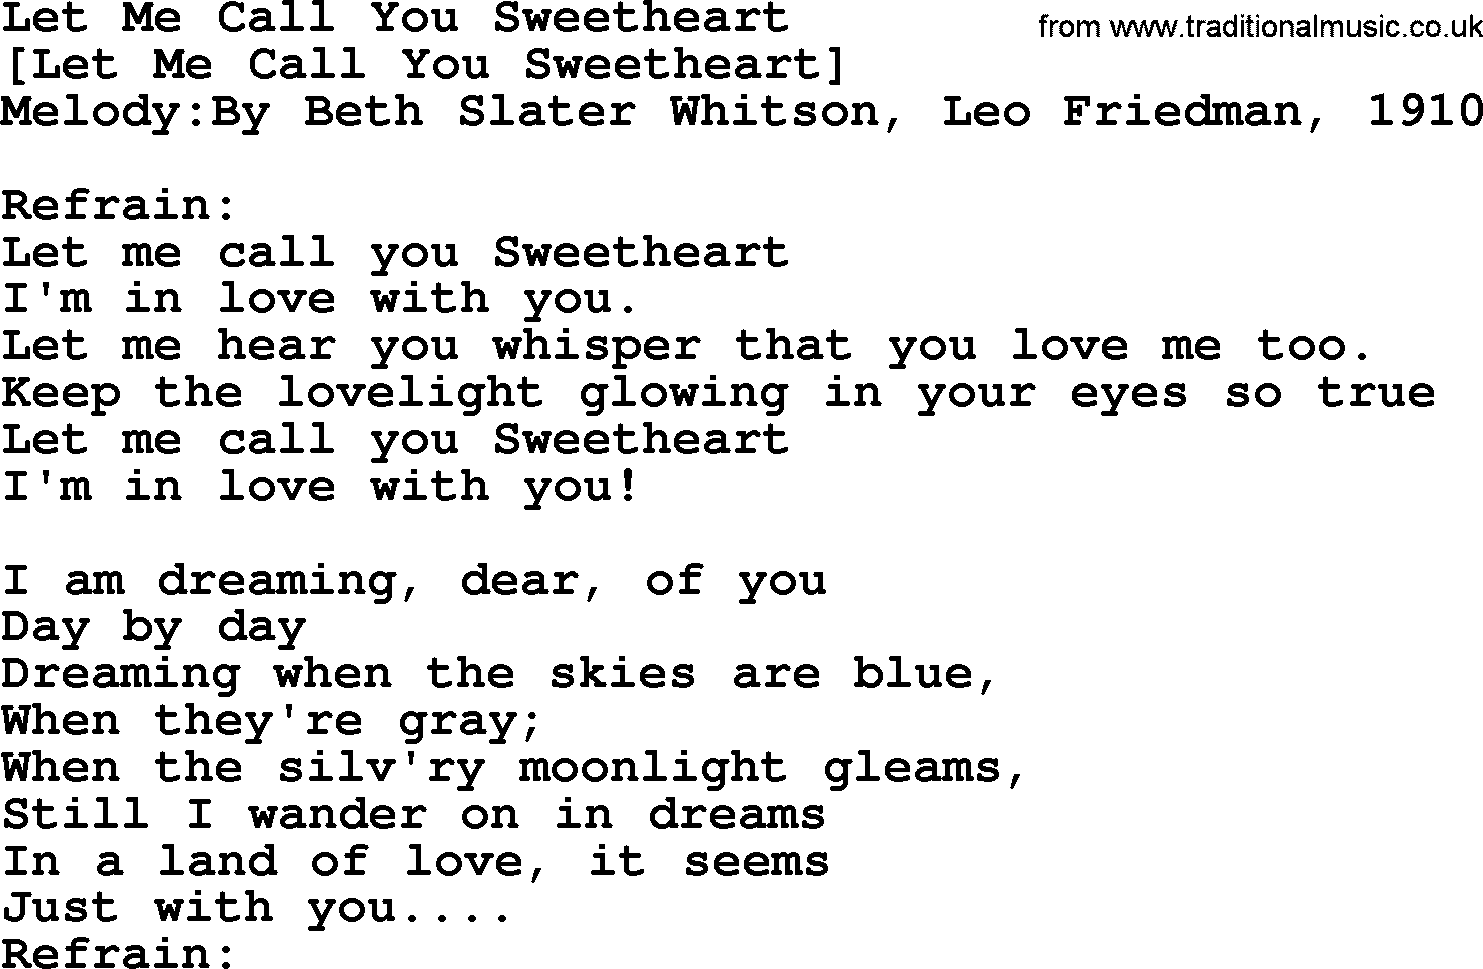 Old American Song: Let Me Call You Sweetheart, lyrics